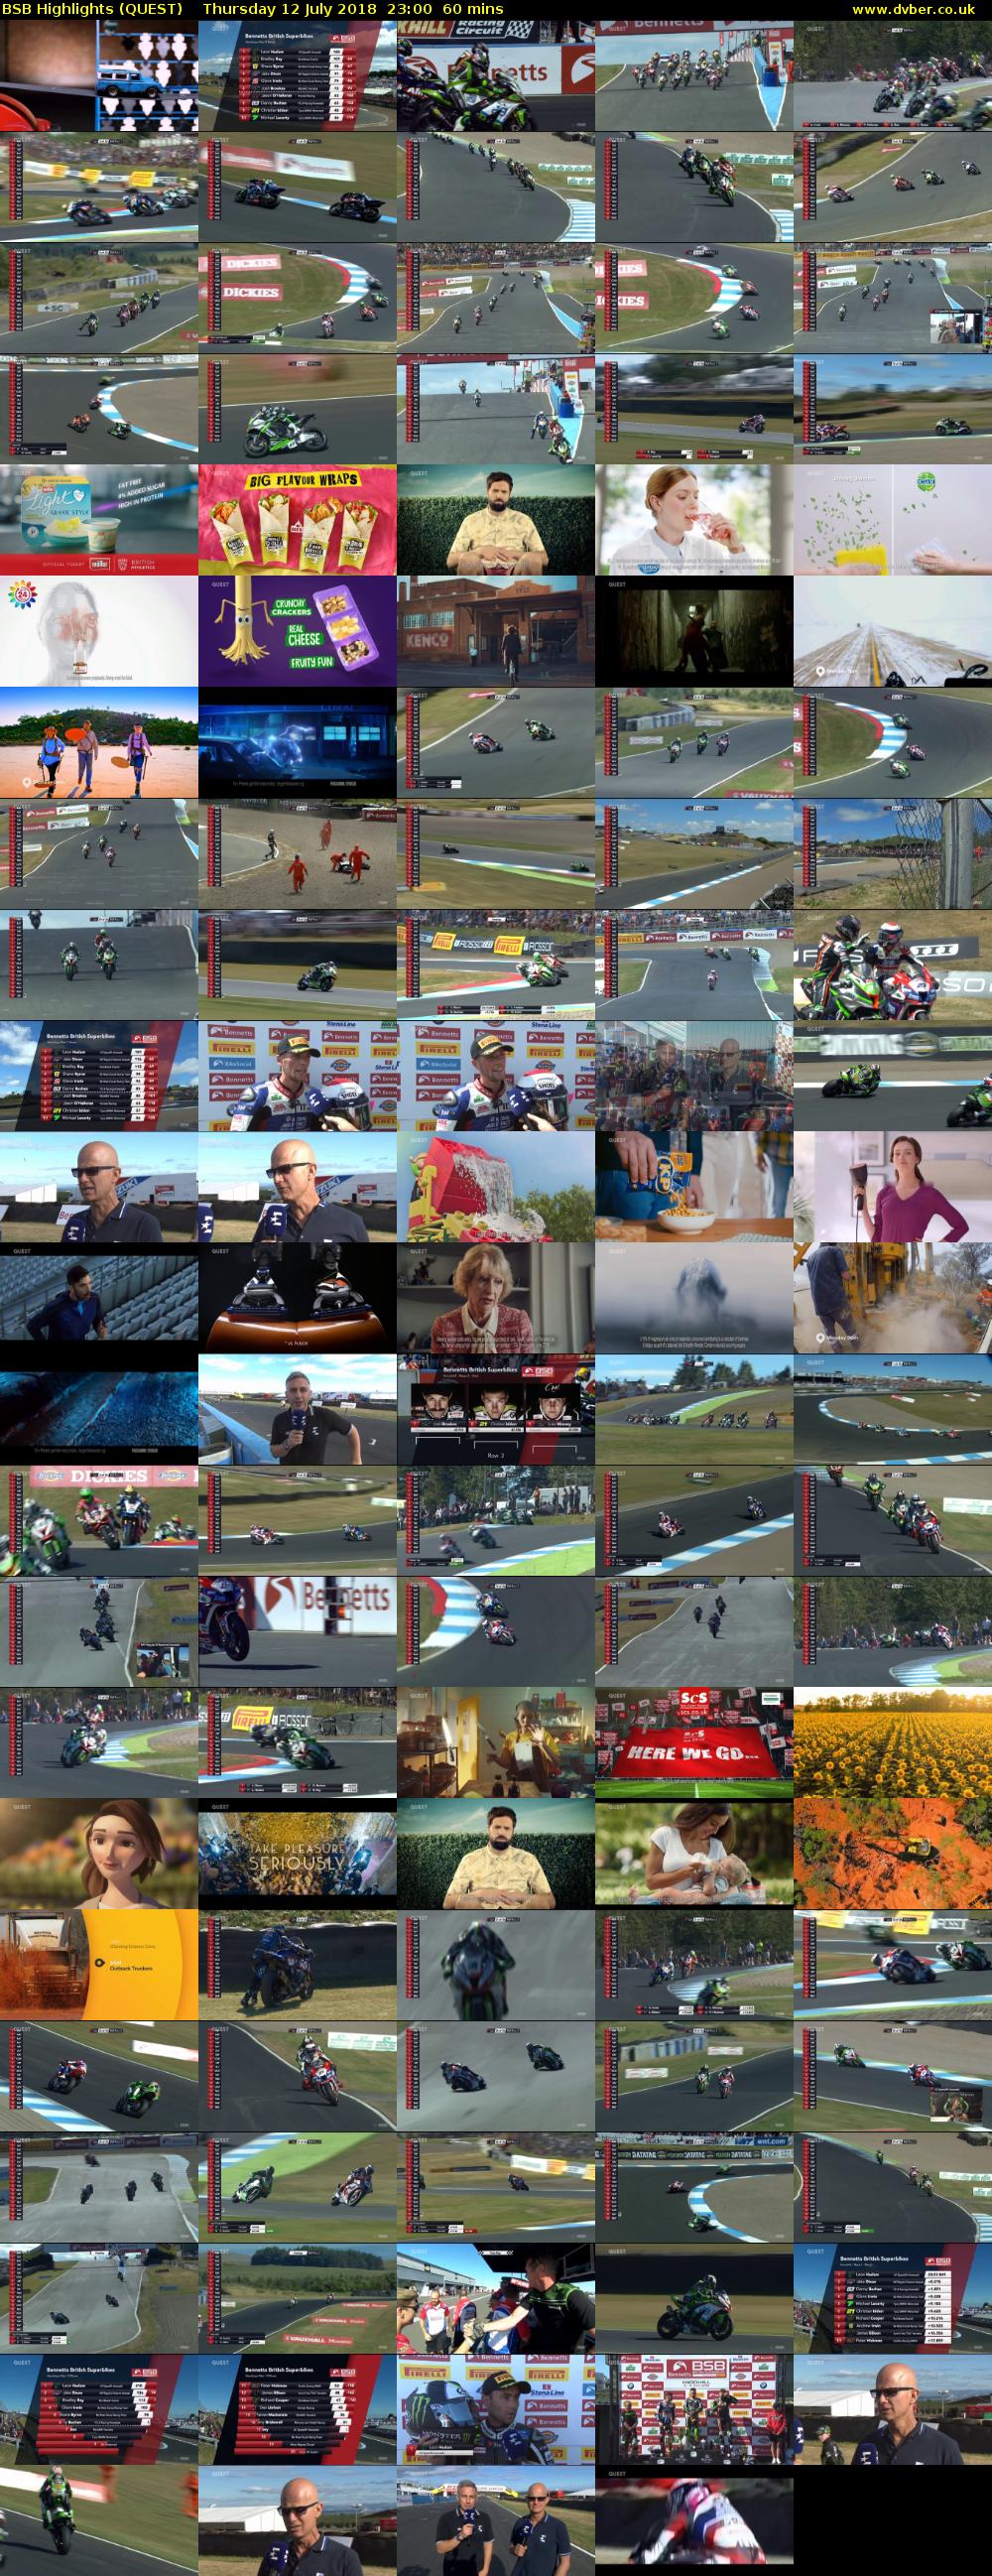 BSB Highlights (QUEST) Thursday 12 July 2018 23:00 - 00:00